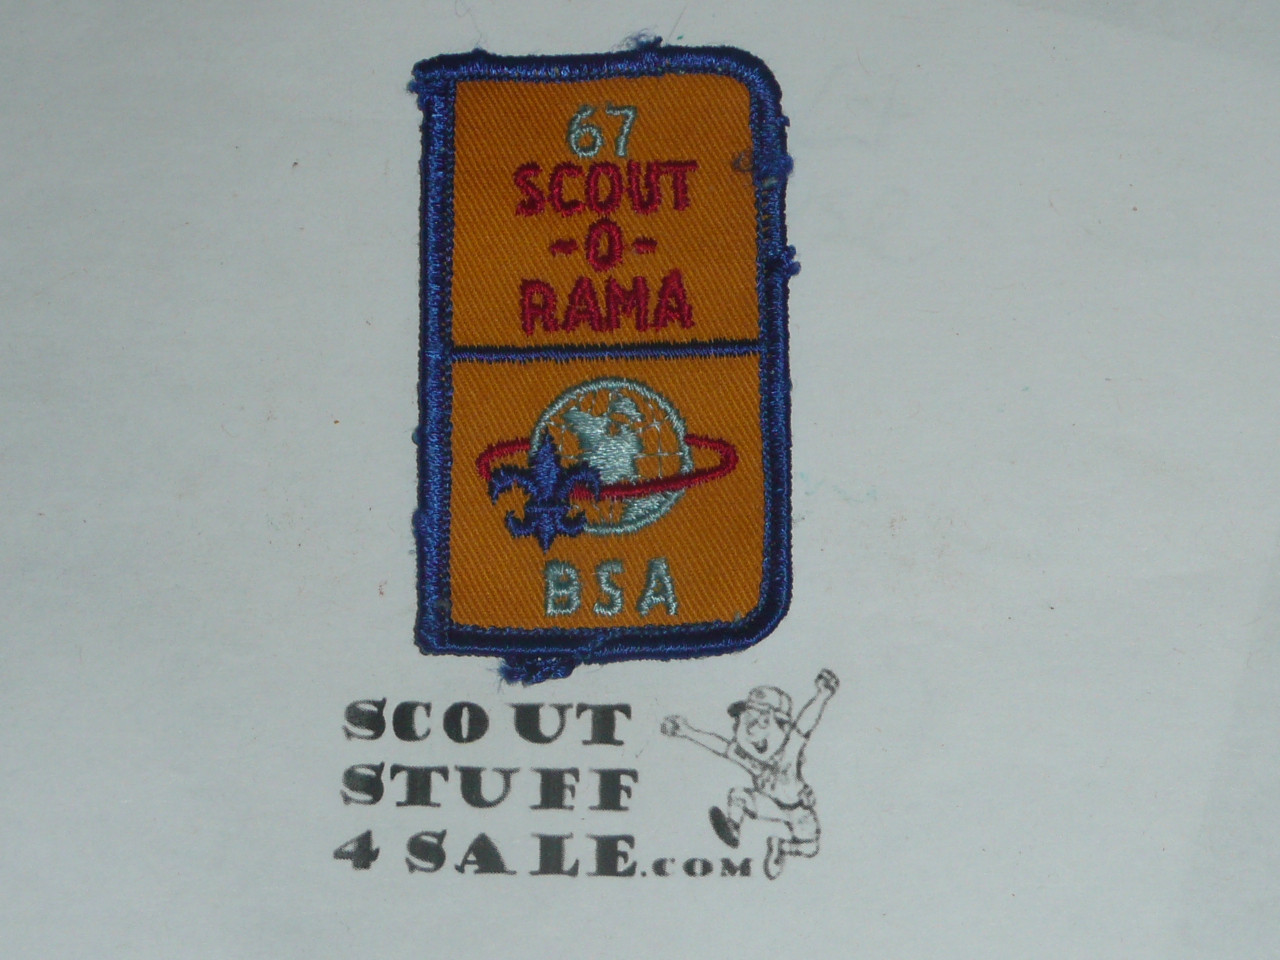 1967 Scout-O-Rama Generic Patch, used